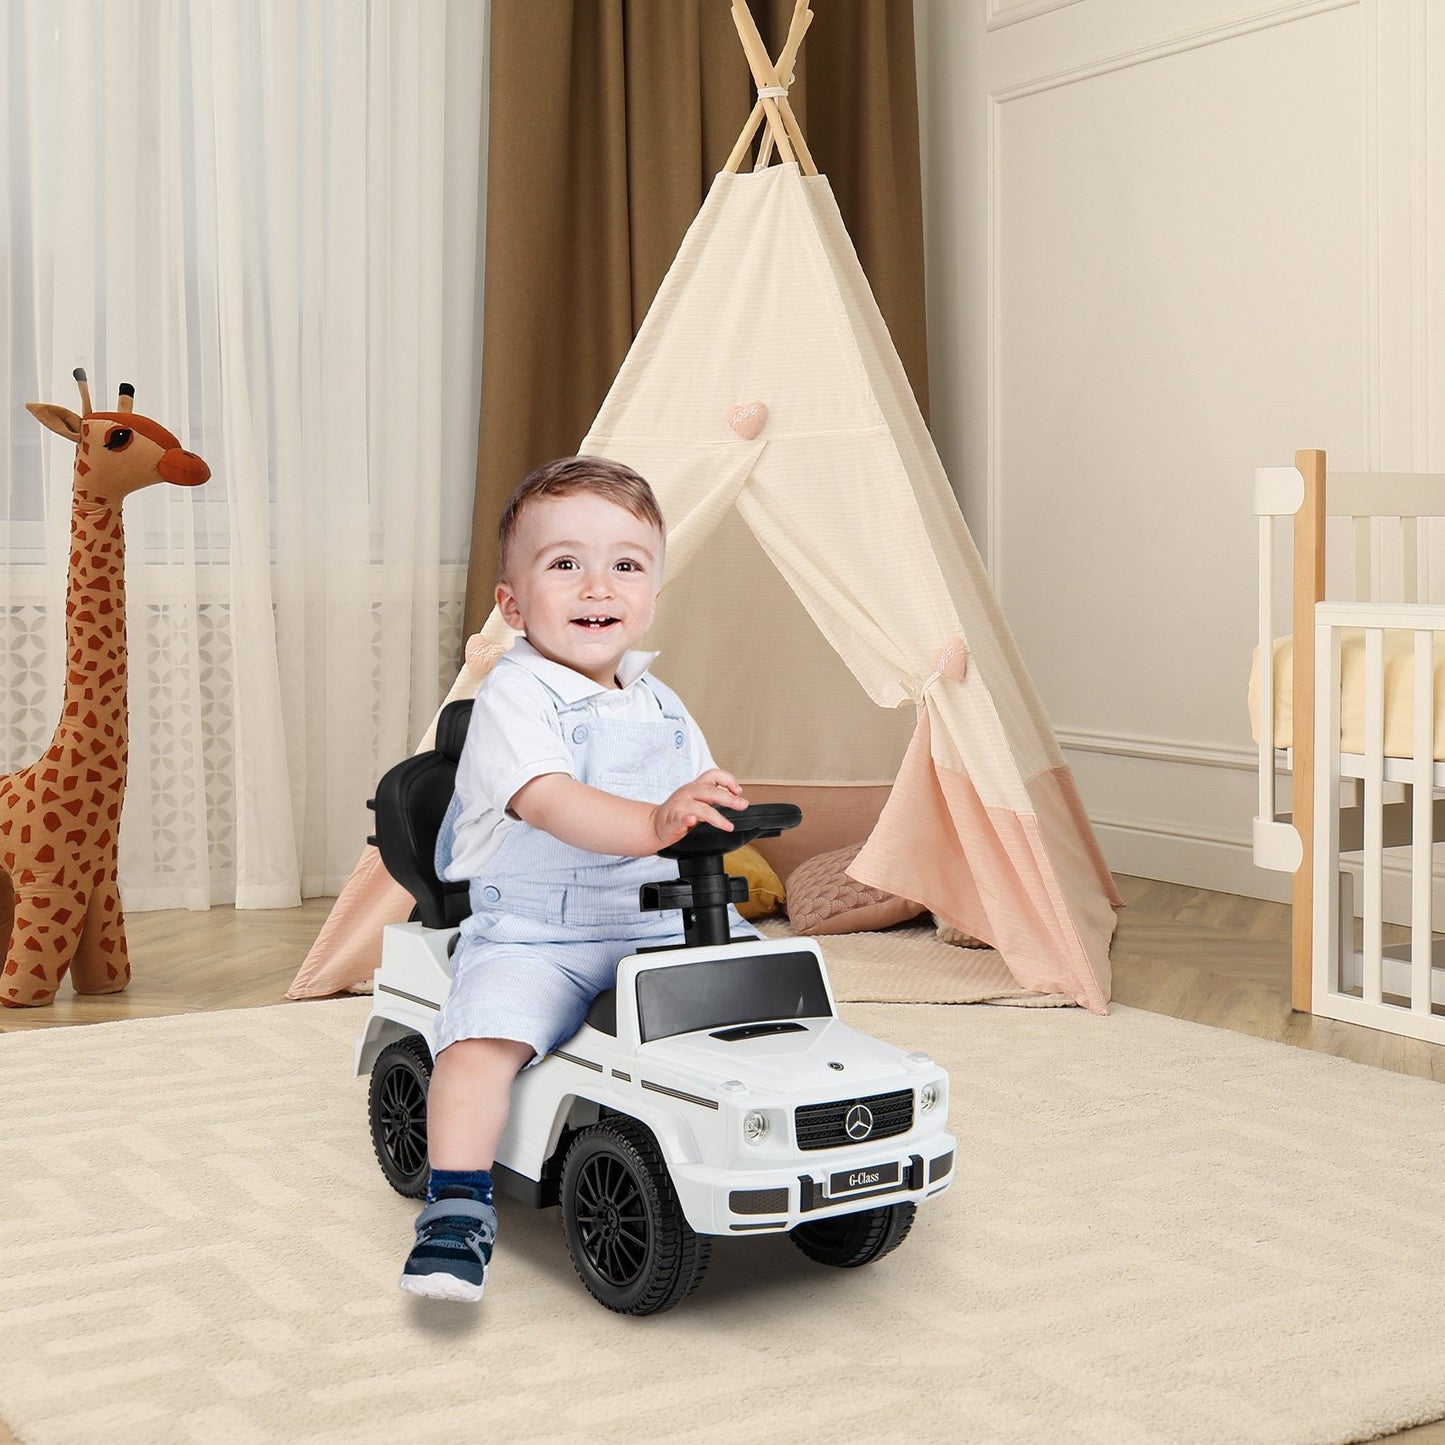 3-In-1 Ride on Push Car Mercedes Benz G350 Stroller Sliding Car with Canopy, White